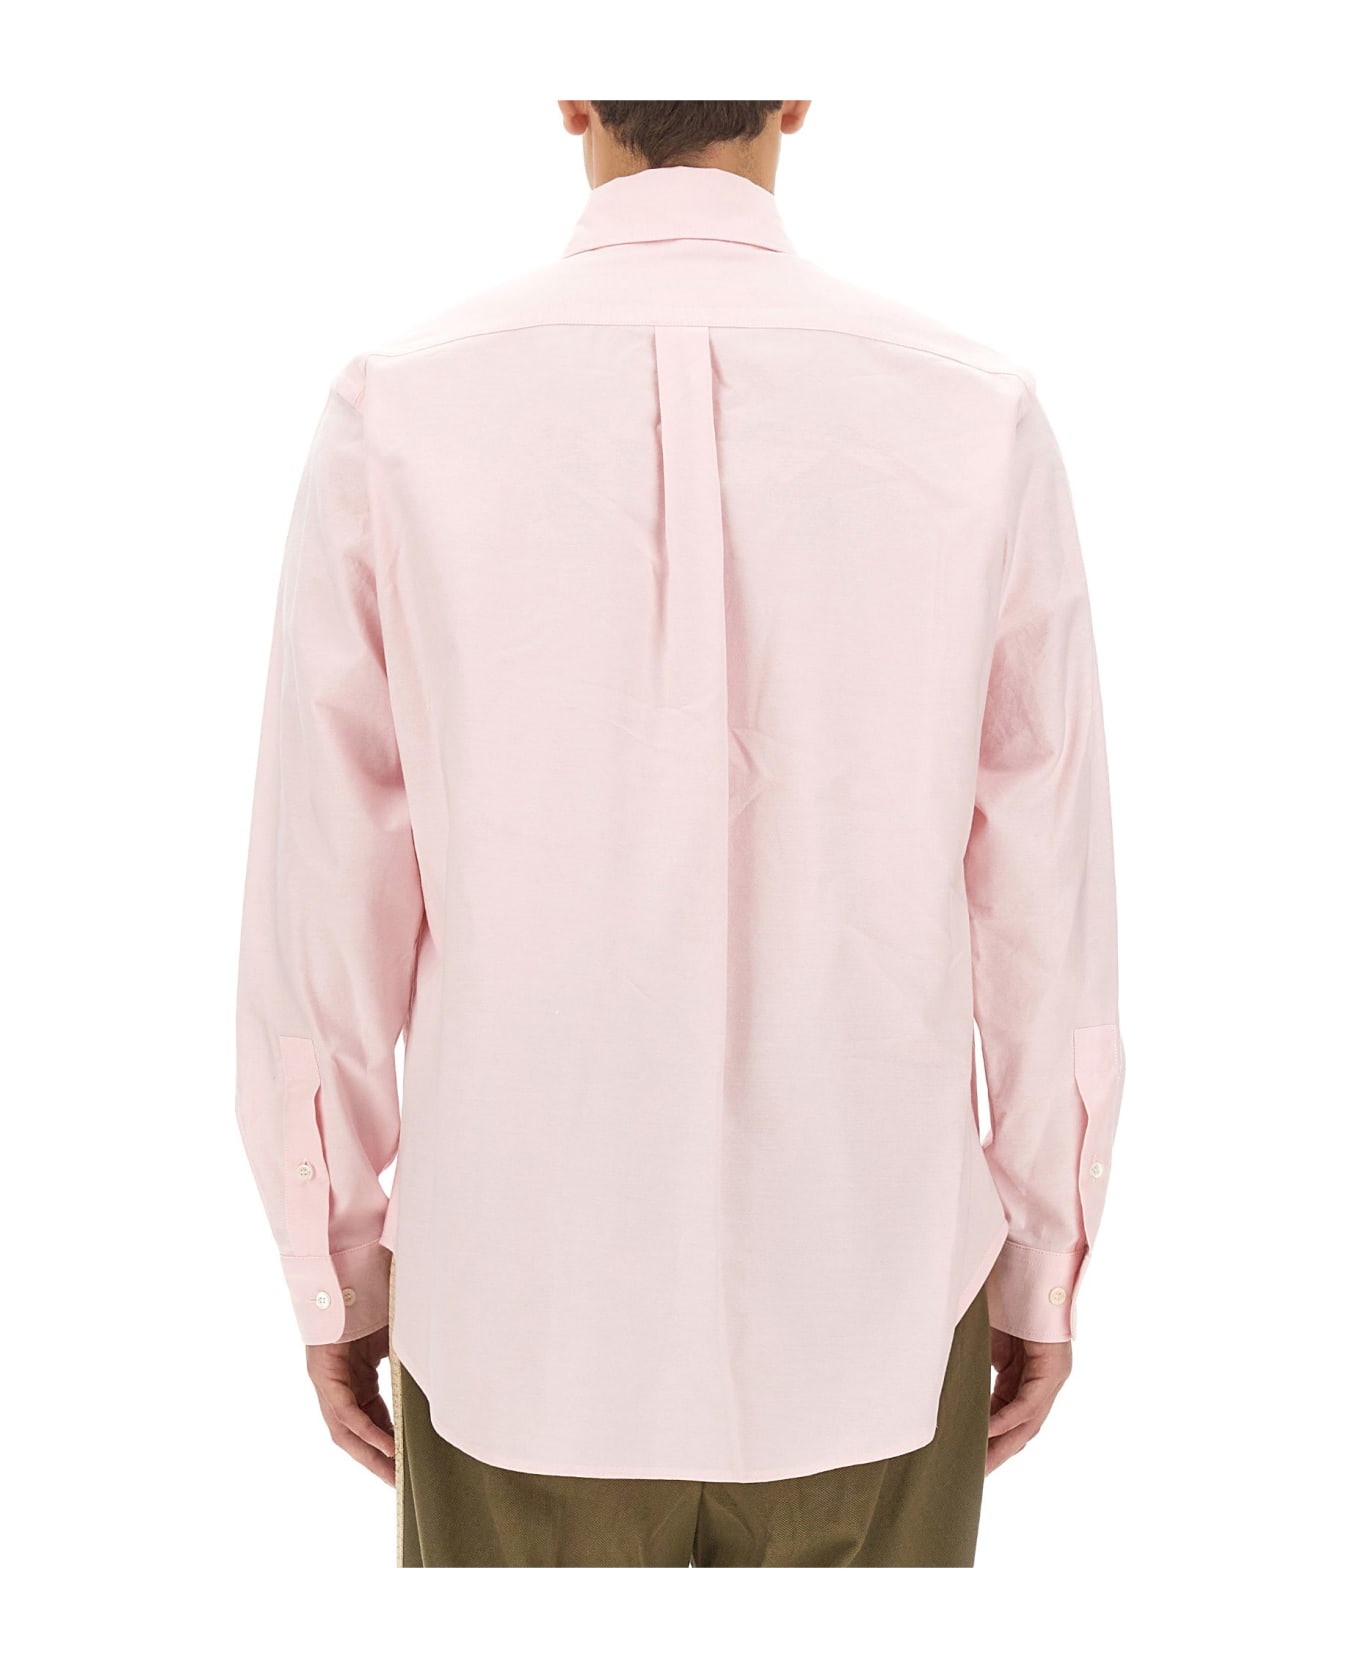 Palm Angels Tailor-made Shirt - PINK/BLACK シャツ